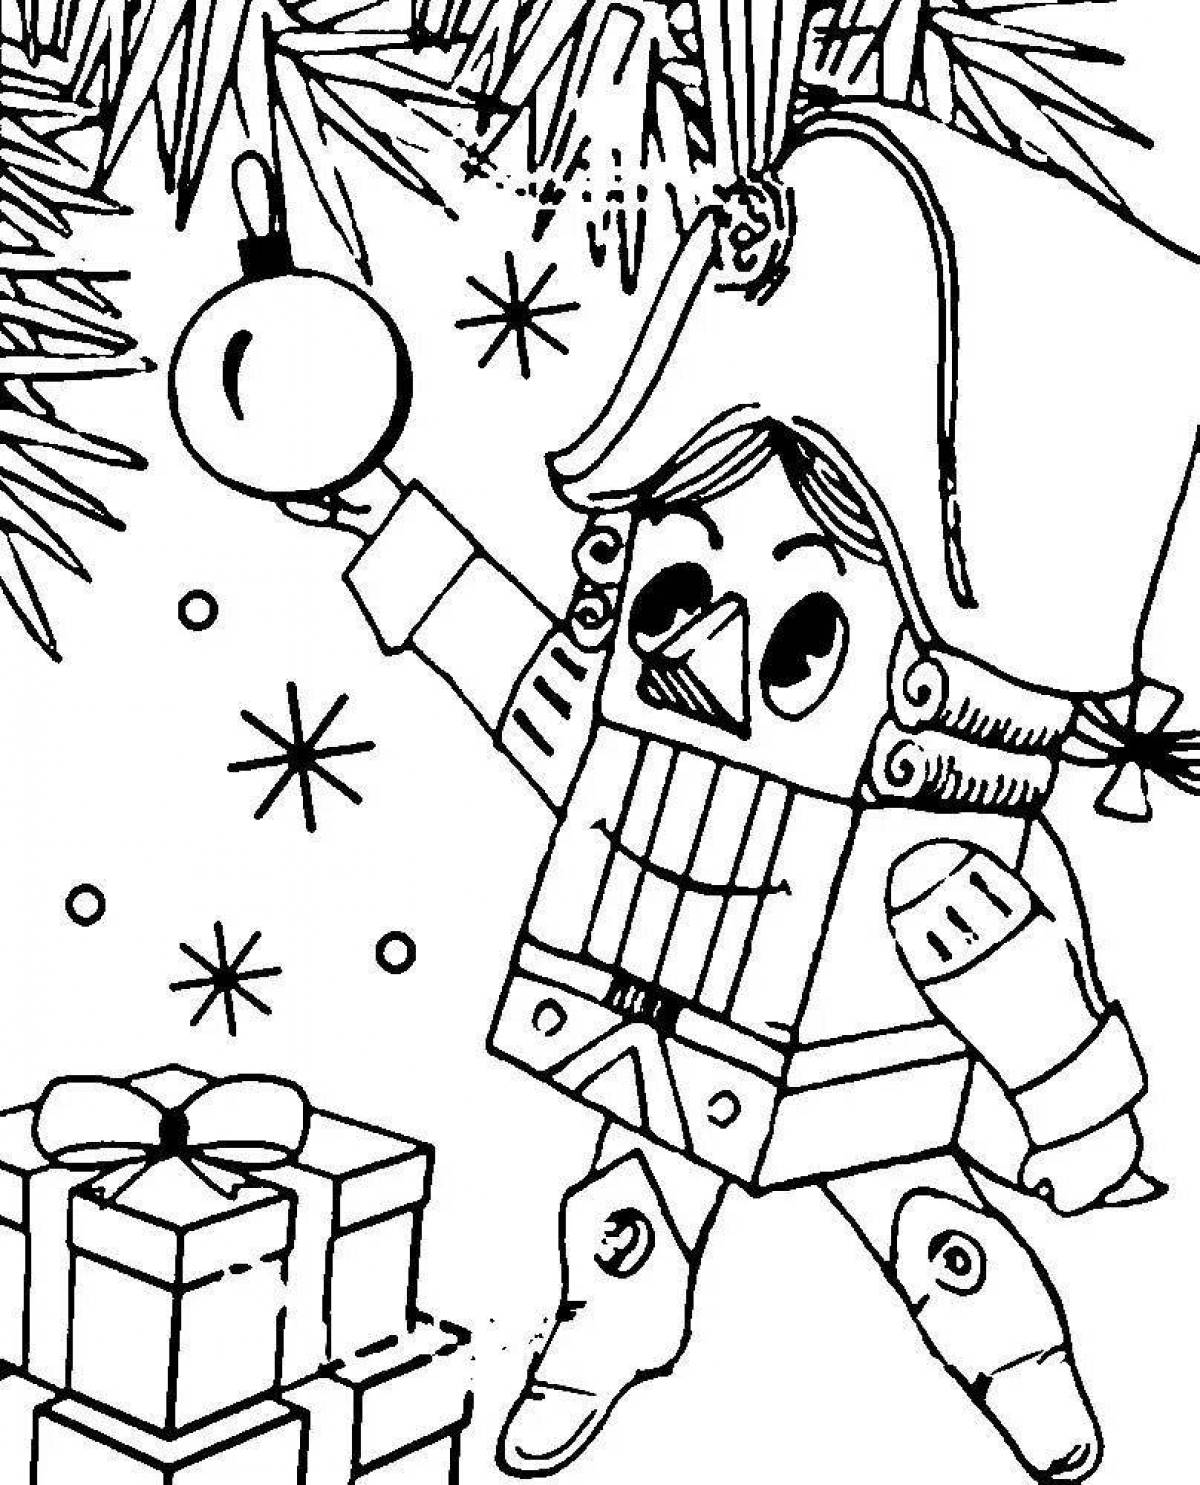 Coloring poster of the living nutcracker